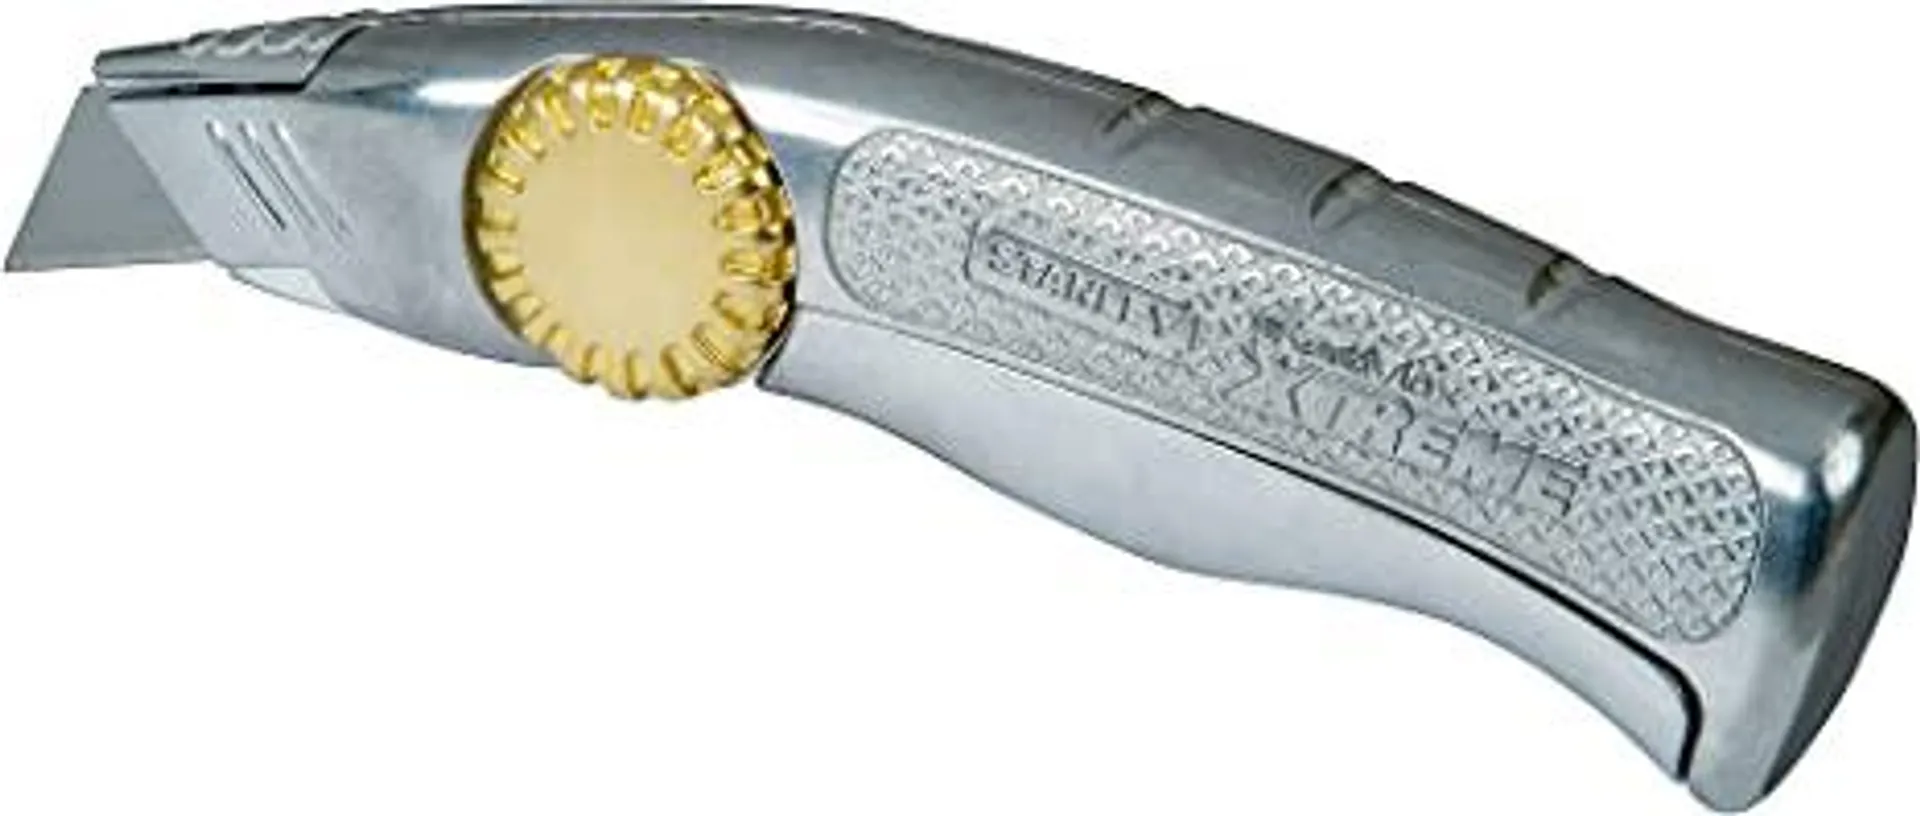 Stanley 0-10-818 Snap Off Knife"Pro" with fixed blade, Silver